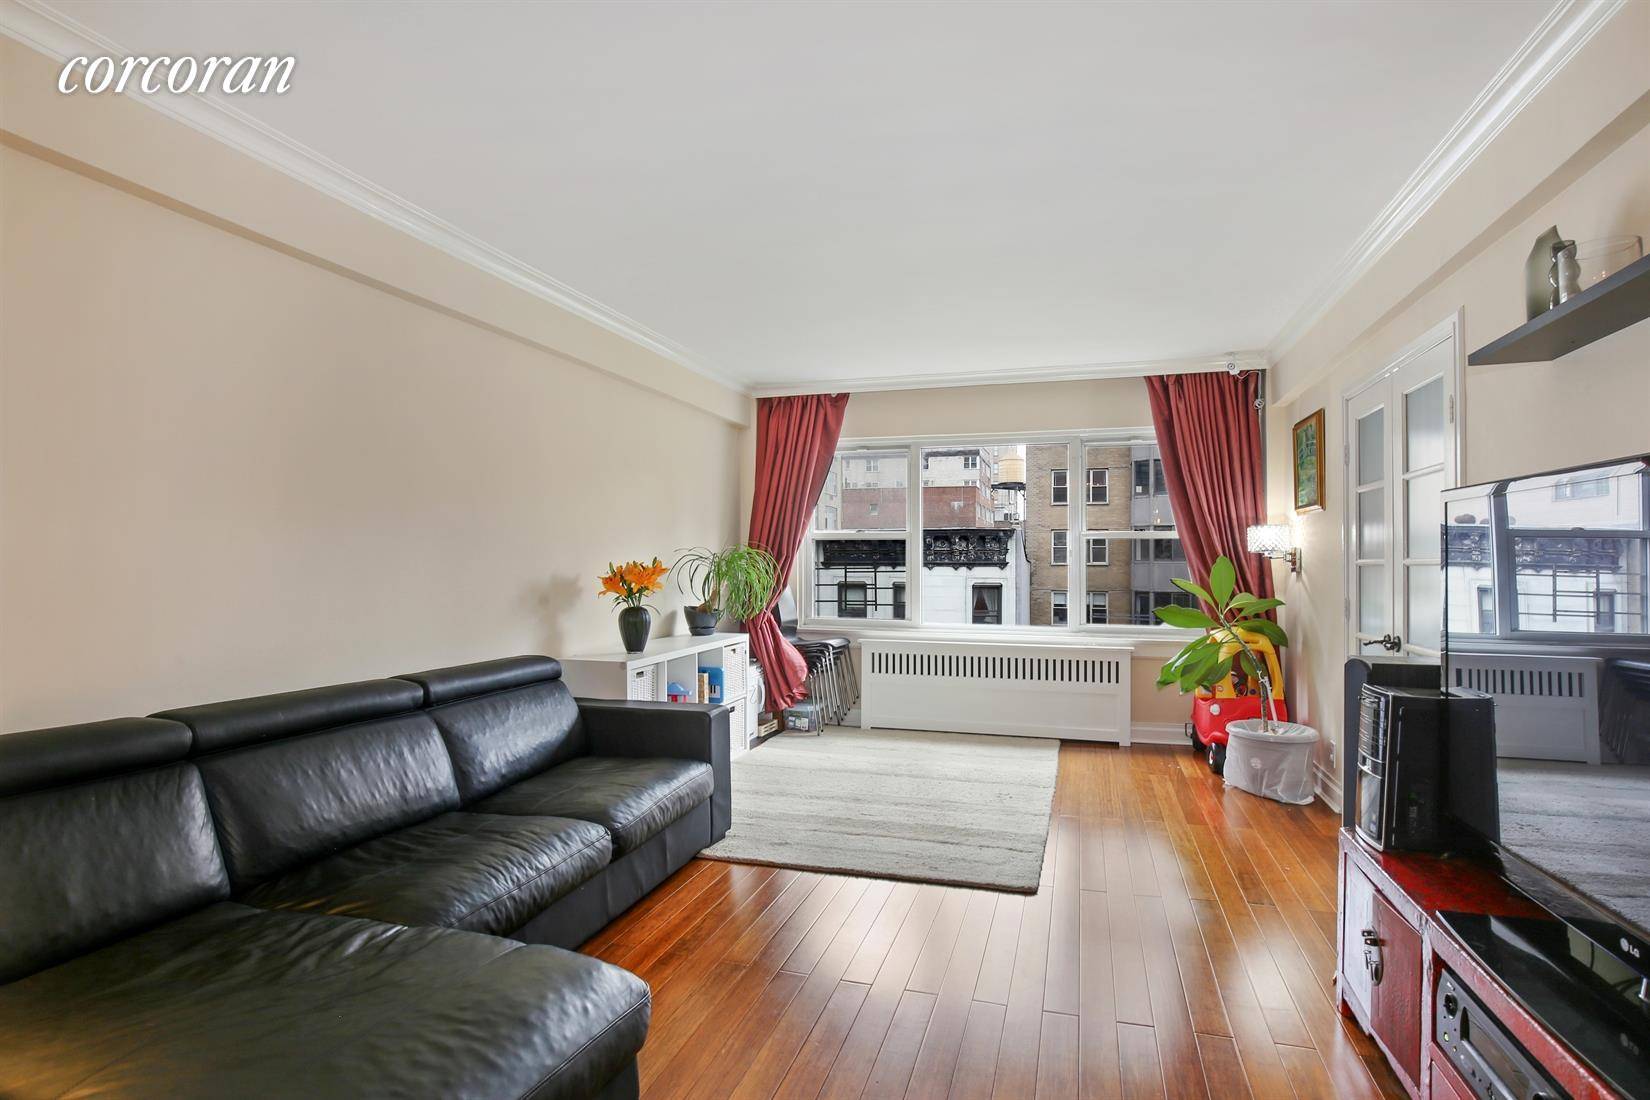 New Price ! 288 Lexington, apt 6DE is an investor friendly, renovated 3 bedroom, 2 bathroom apartment with an in unit Washer Dryer for only 1, 280, 000 !